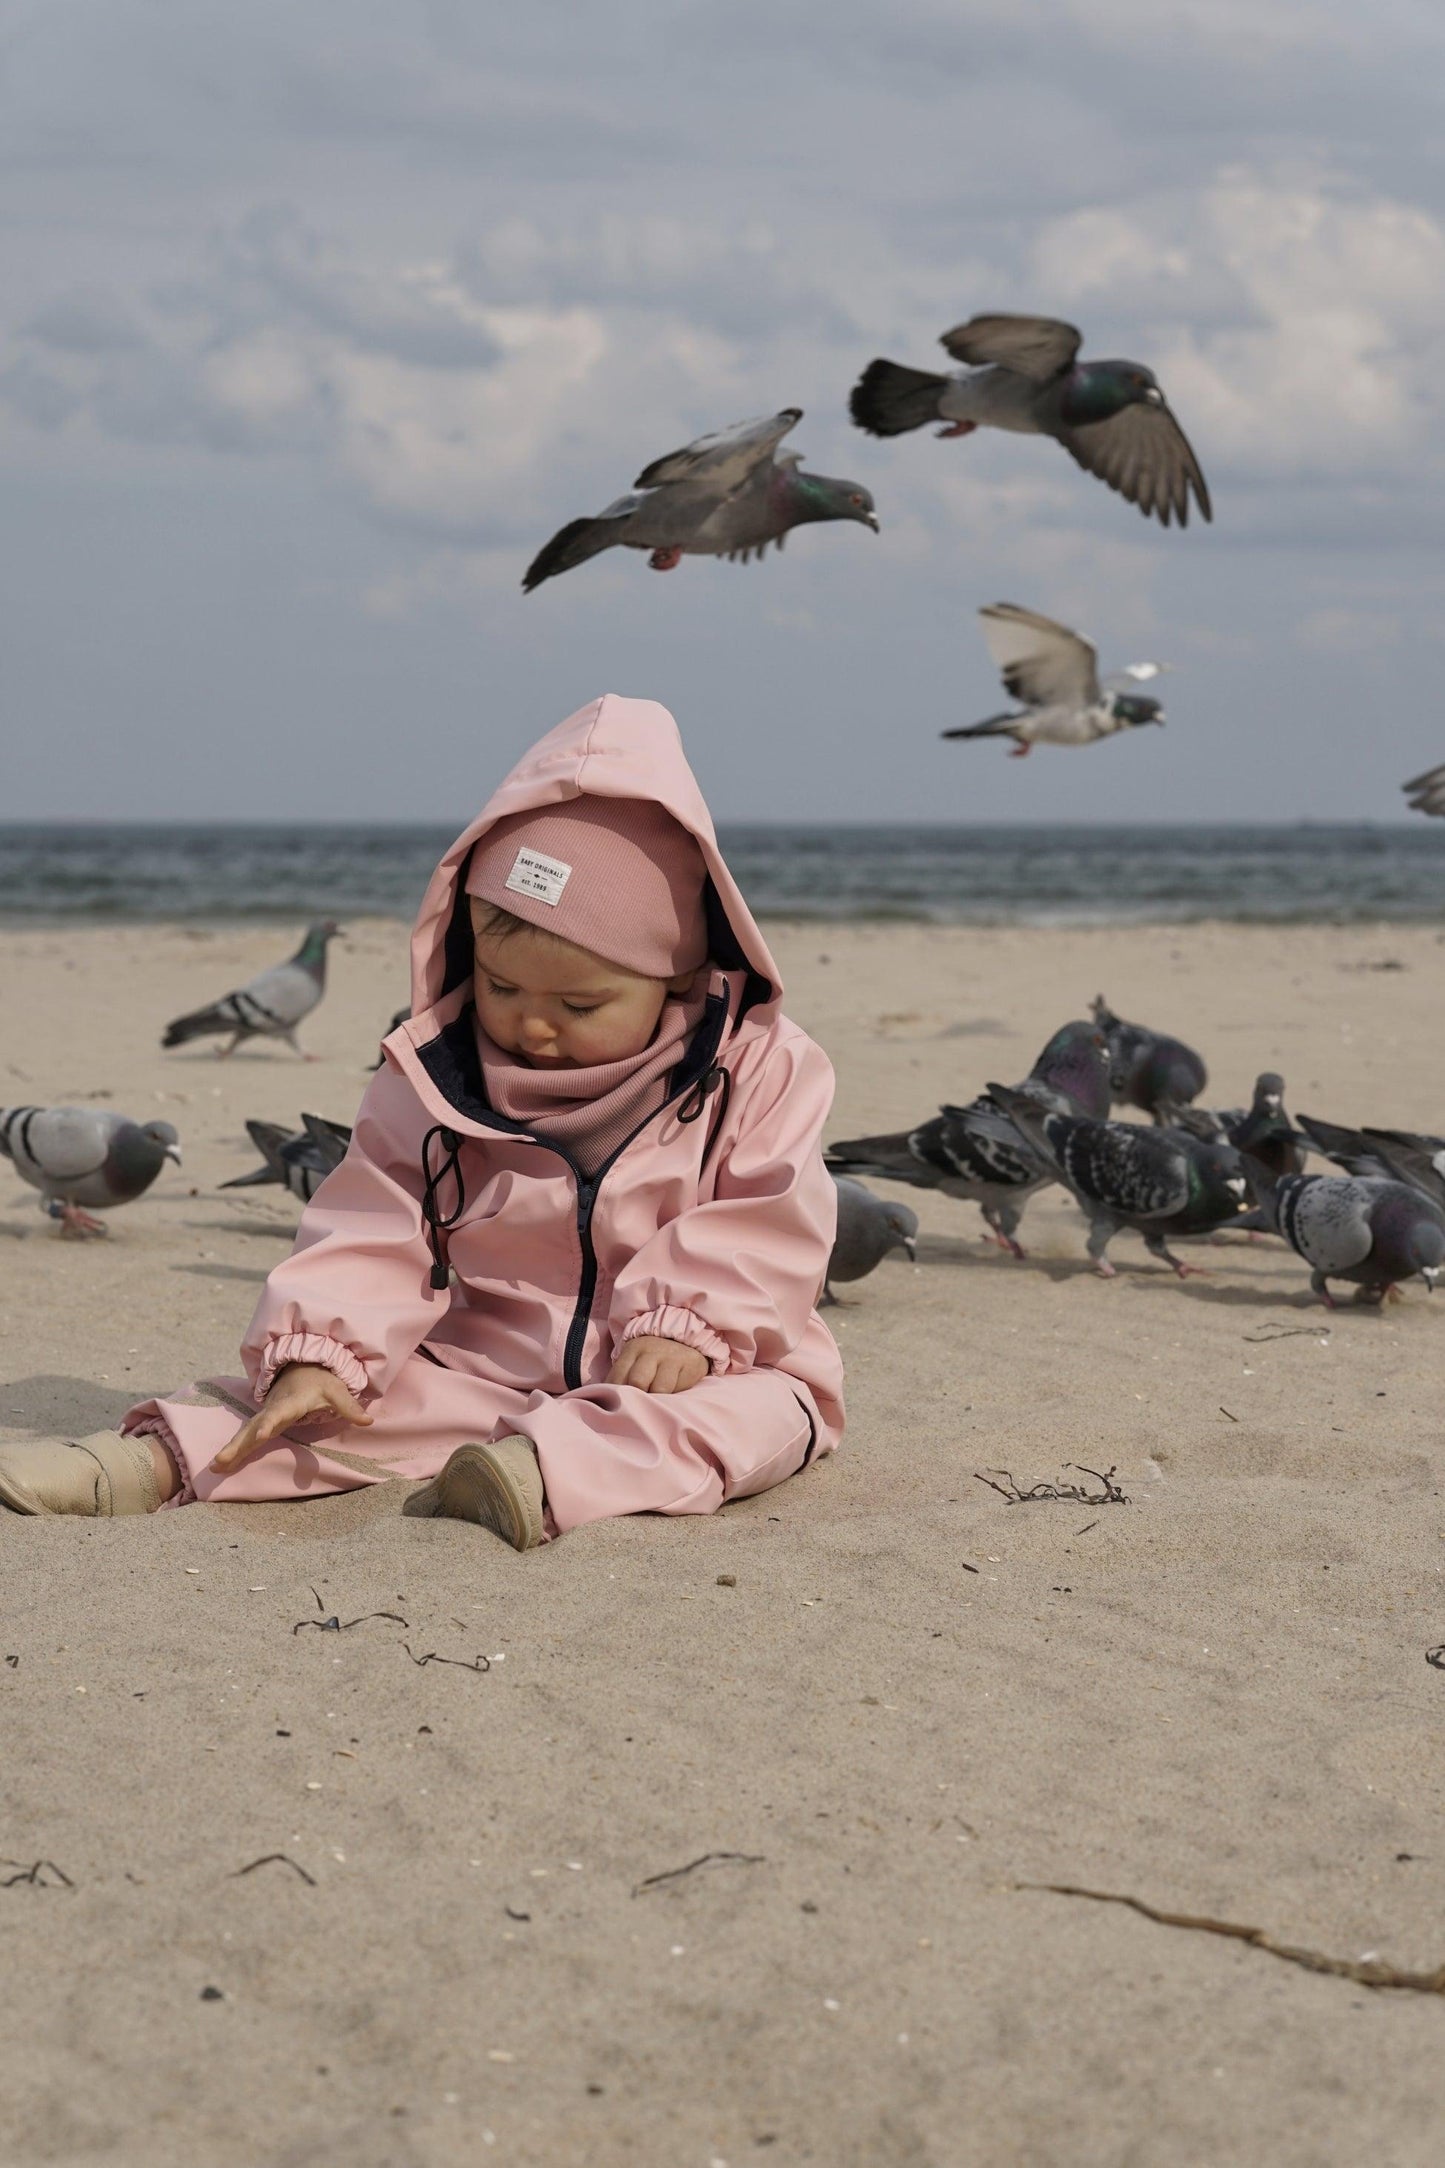 A child in a pink jacket with adjustable suspenders sits on the sand surrounded by pigeons, with some birds in flight near them wearing the Waterproof Baby/Kid Clothing Set - Rosa from MellowConceptStore.